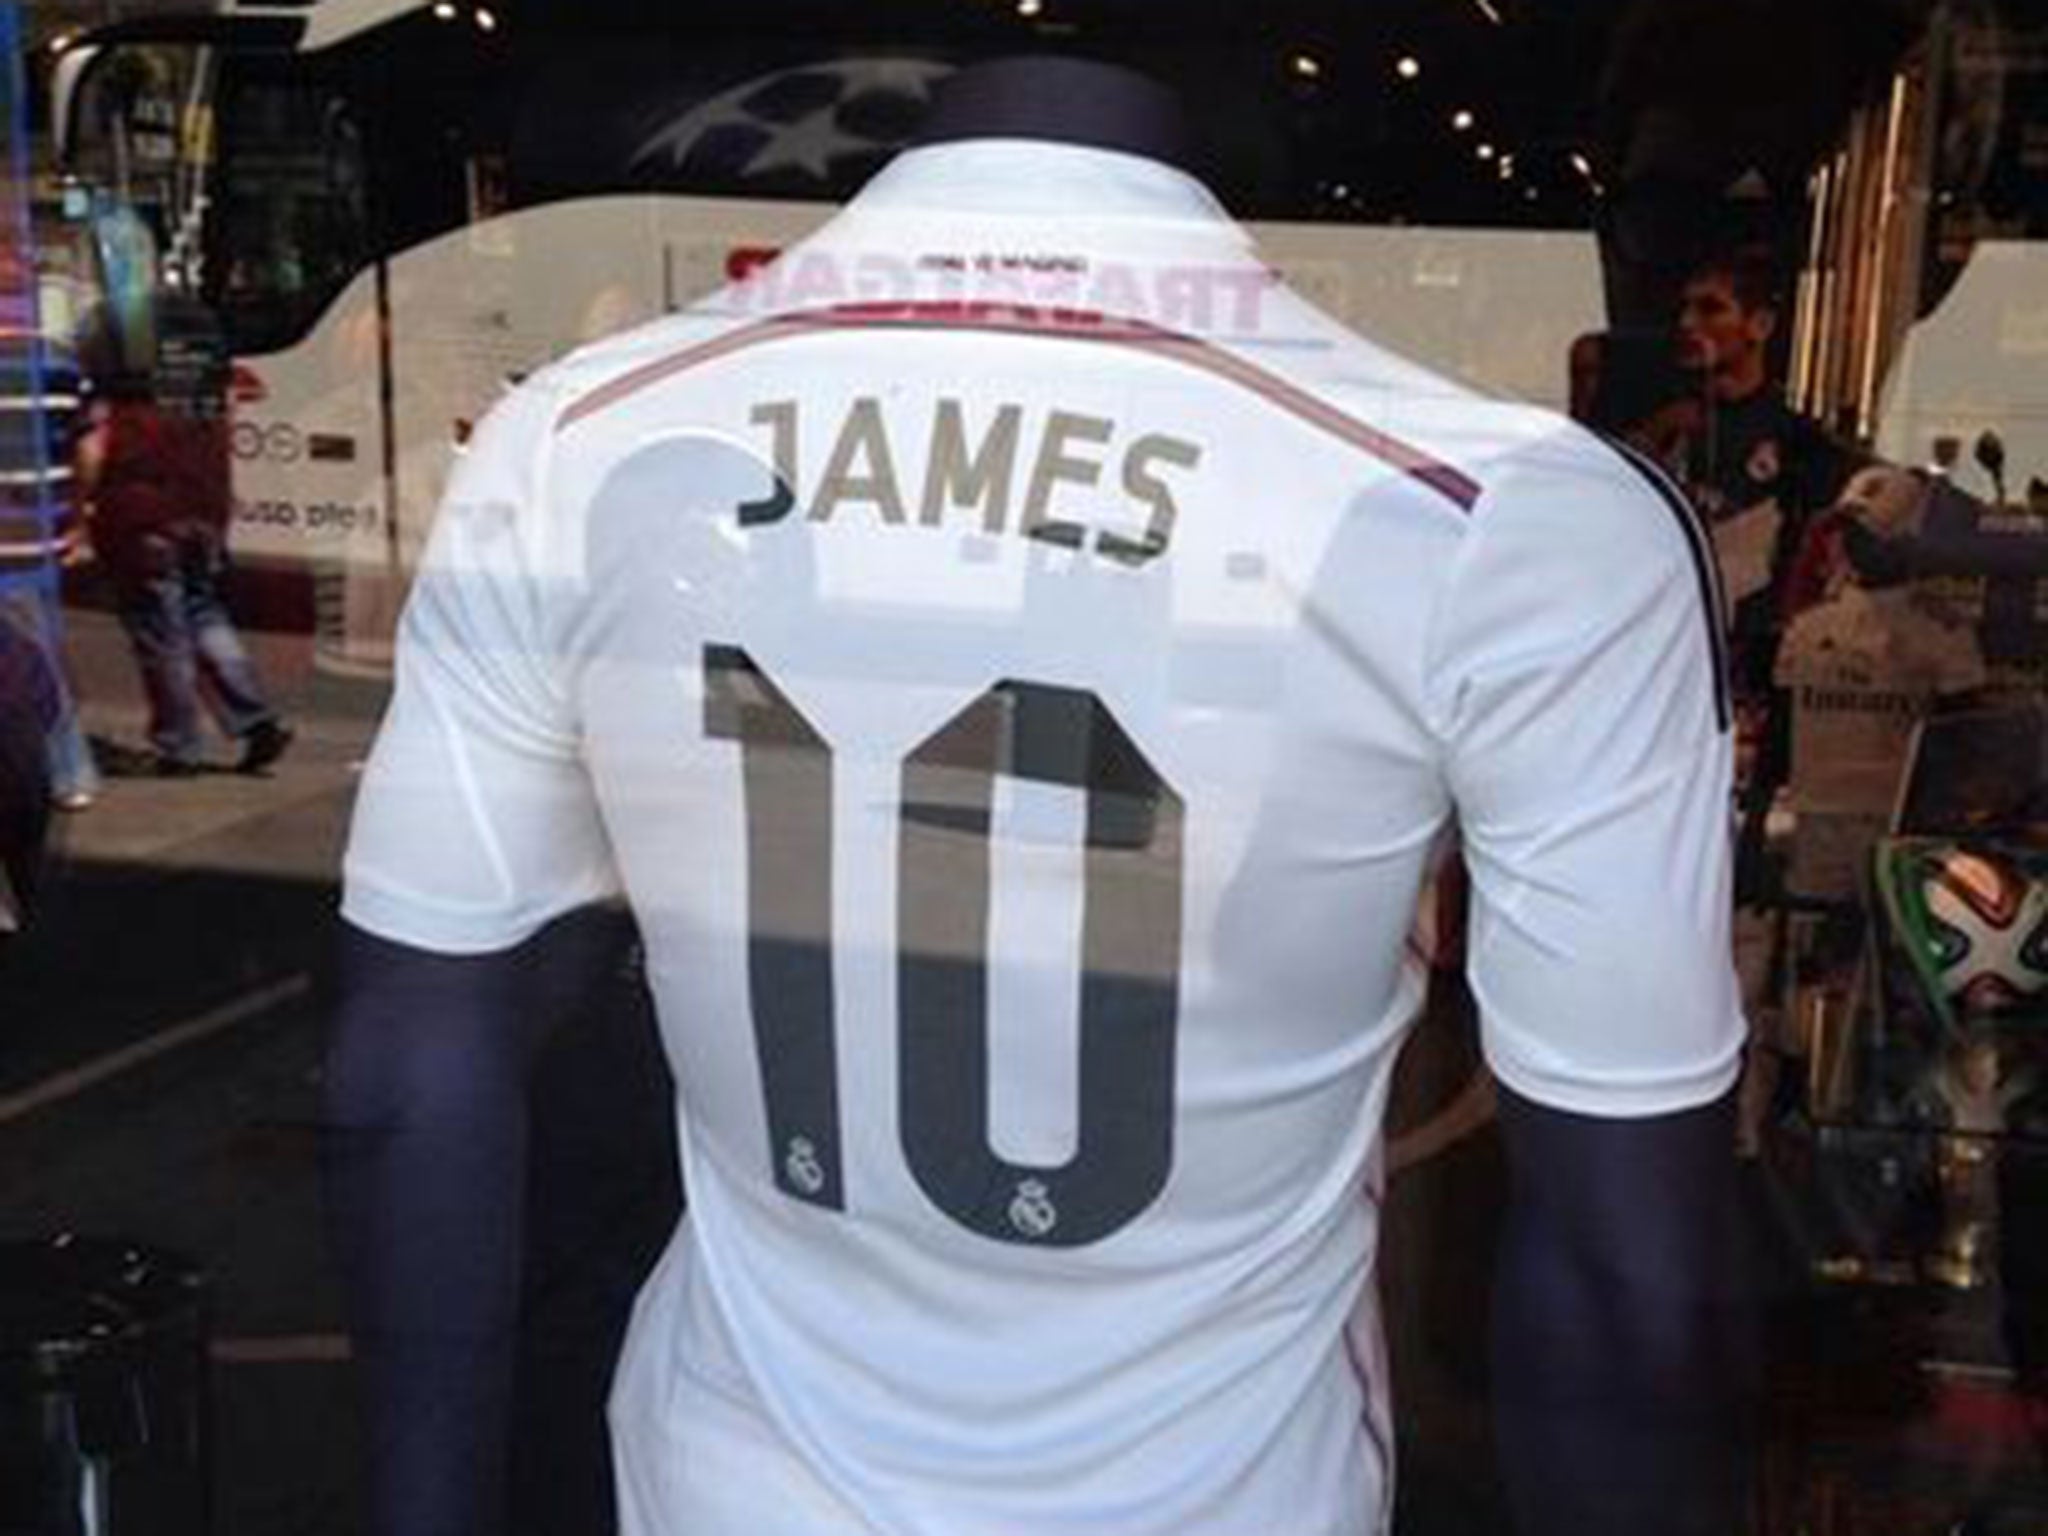 'James 10' shirts are already on sale in Madrid